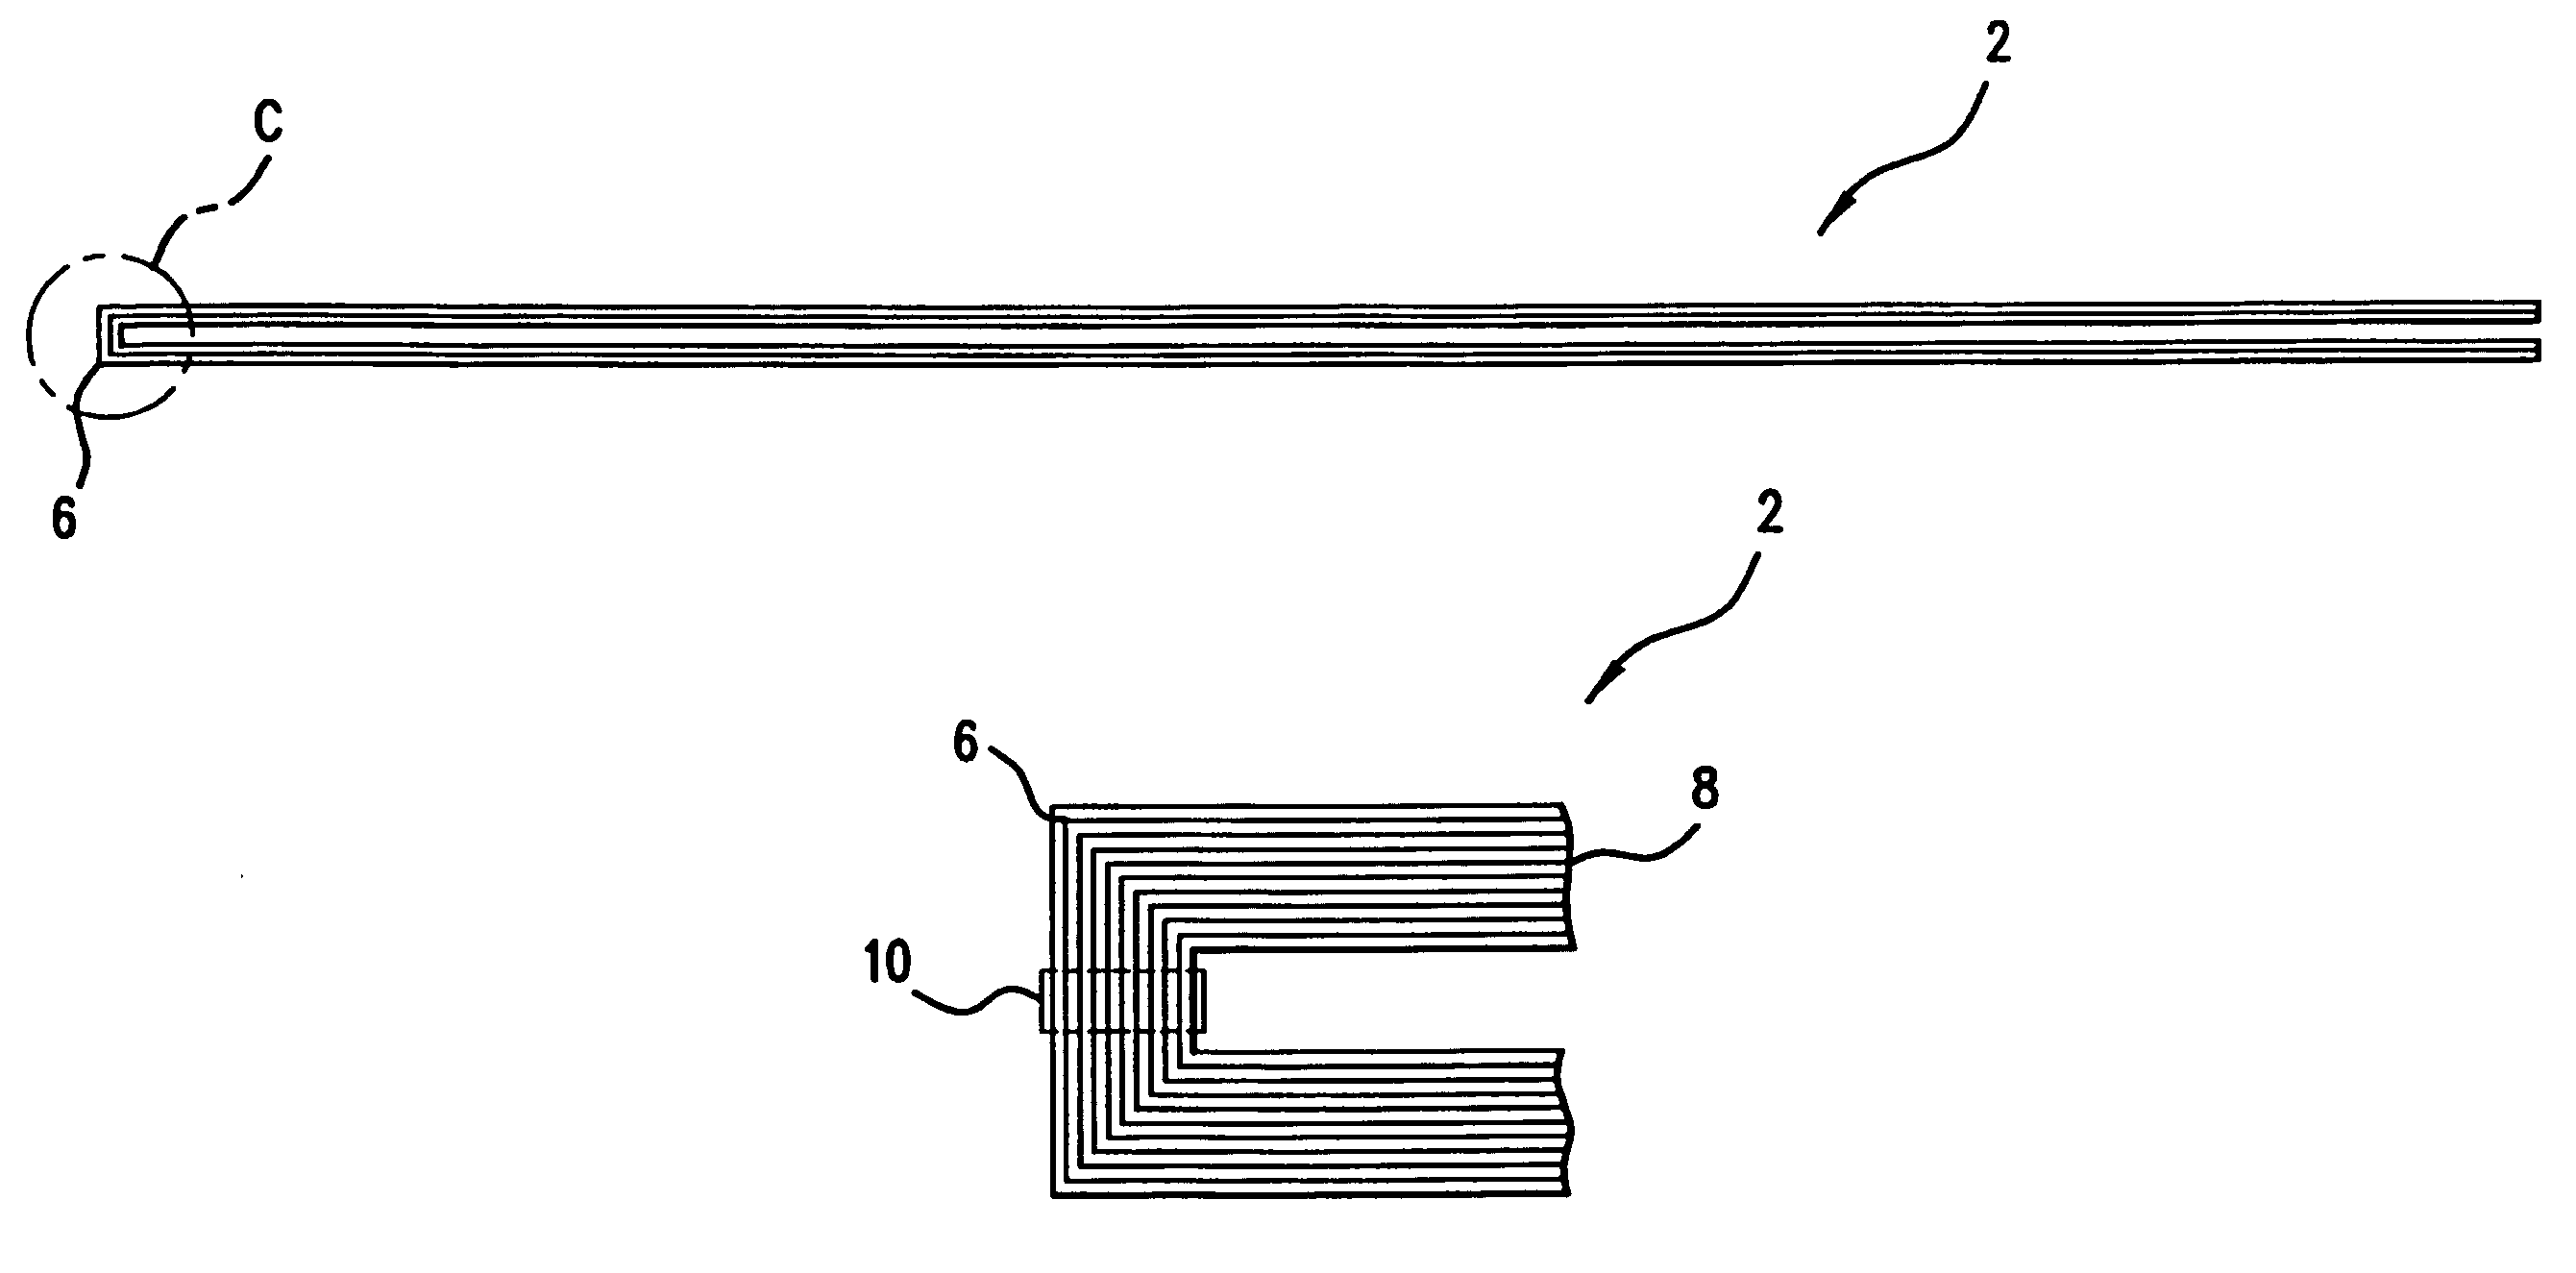 Apparatus and method for creasing media to make booklets